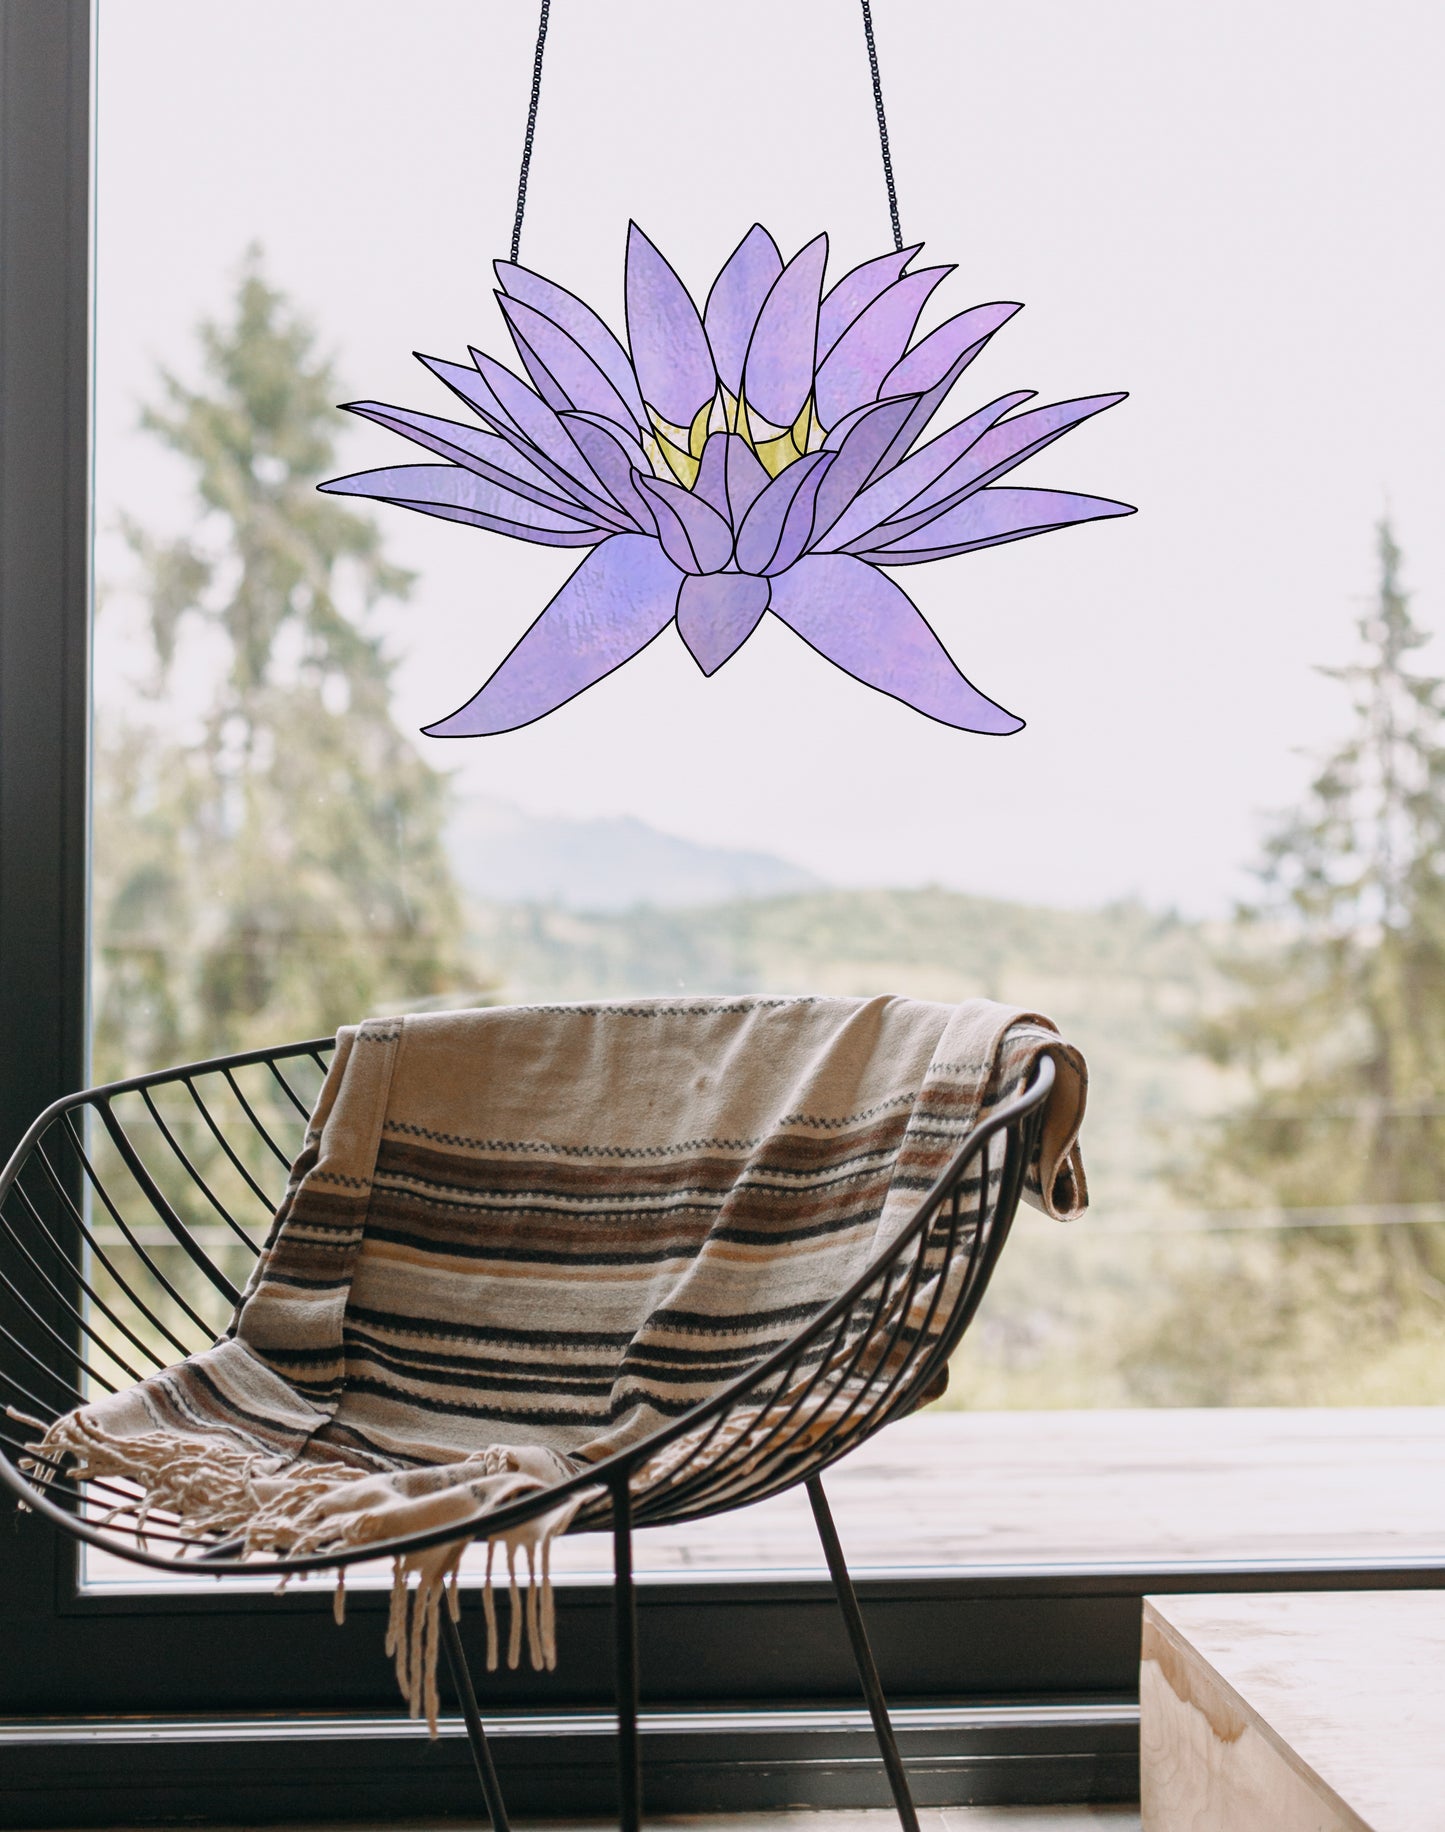 Stained glass pattern for a giant purple water lily flower, instant PDF download, shown hanging in a window with a chair